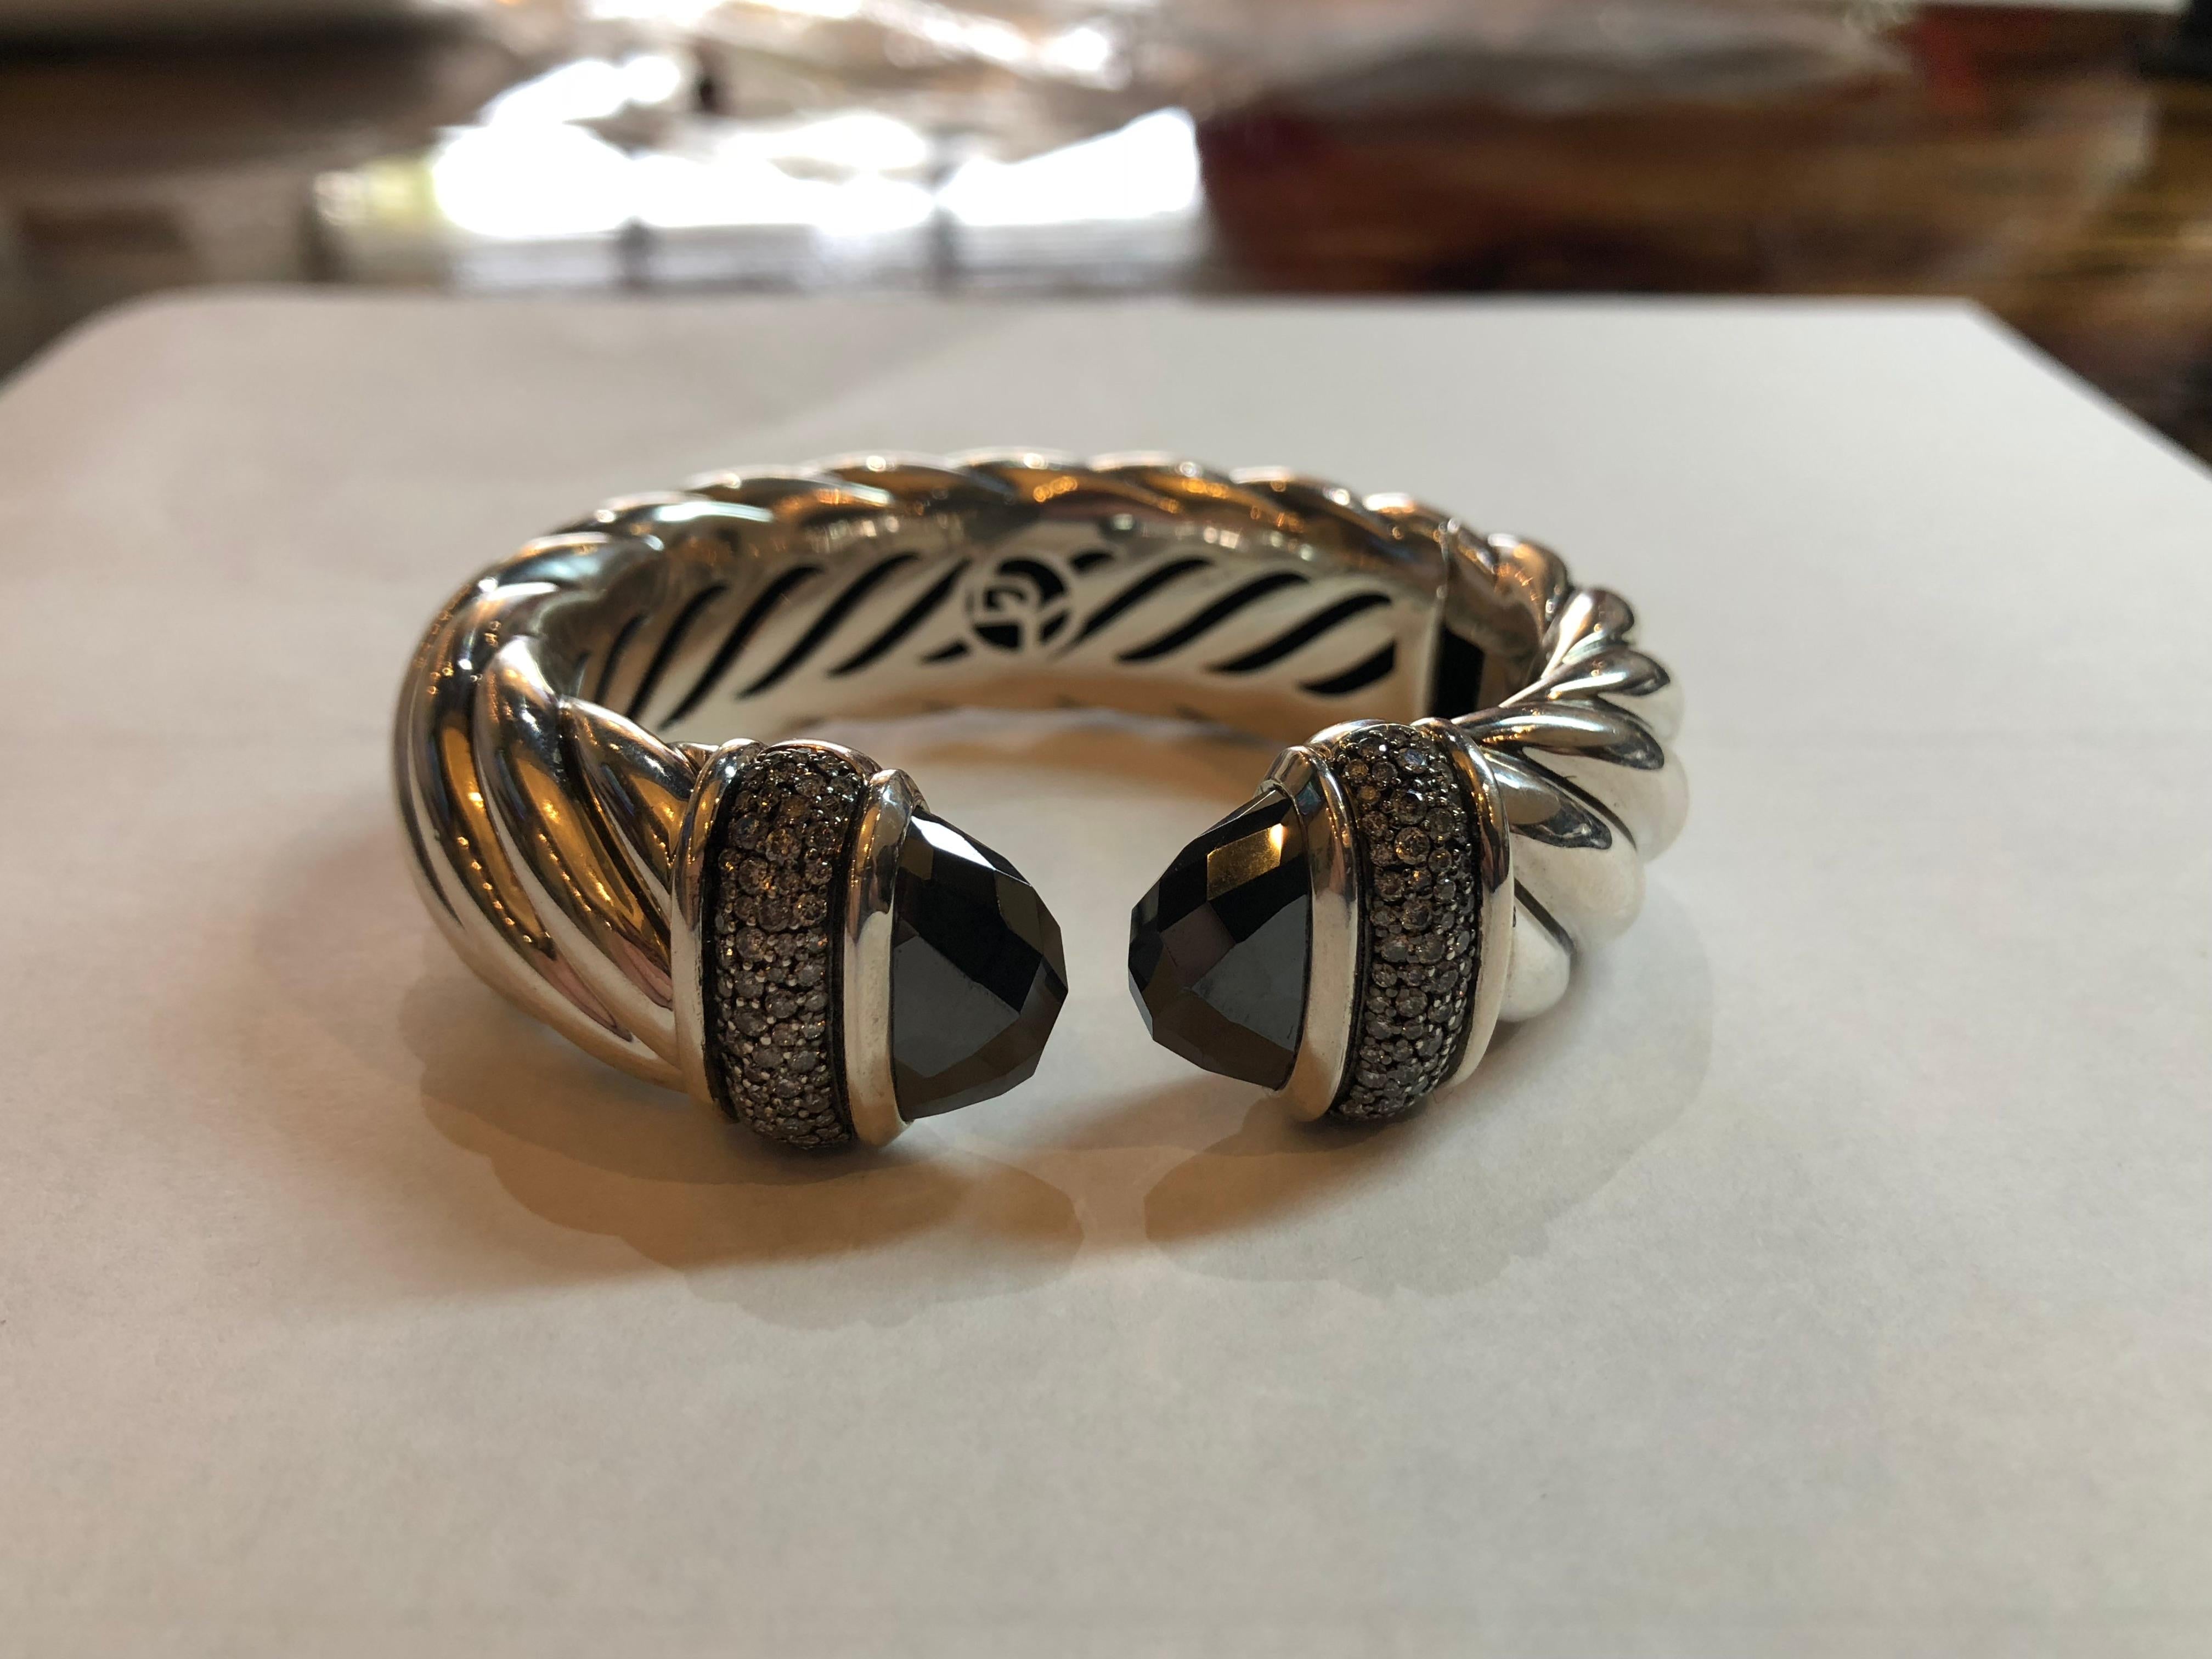 David Yurman Waverly Bracelet Cuff 1.19 cts Diamonds with Hematite Ends
Retail $3500.00
Weighs 69 grams 
Signed D.Y. 925